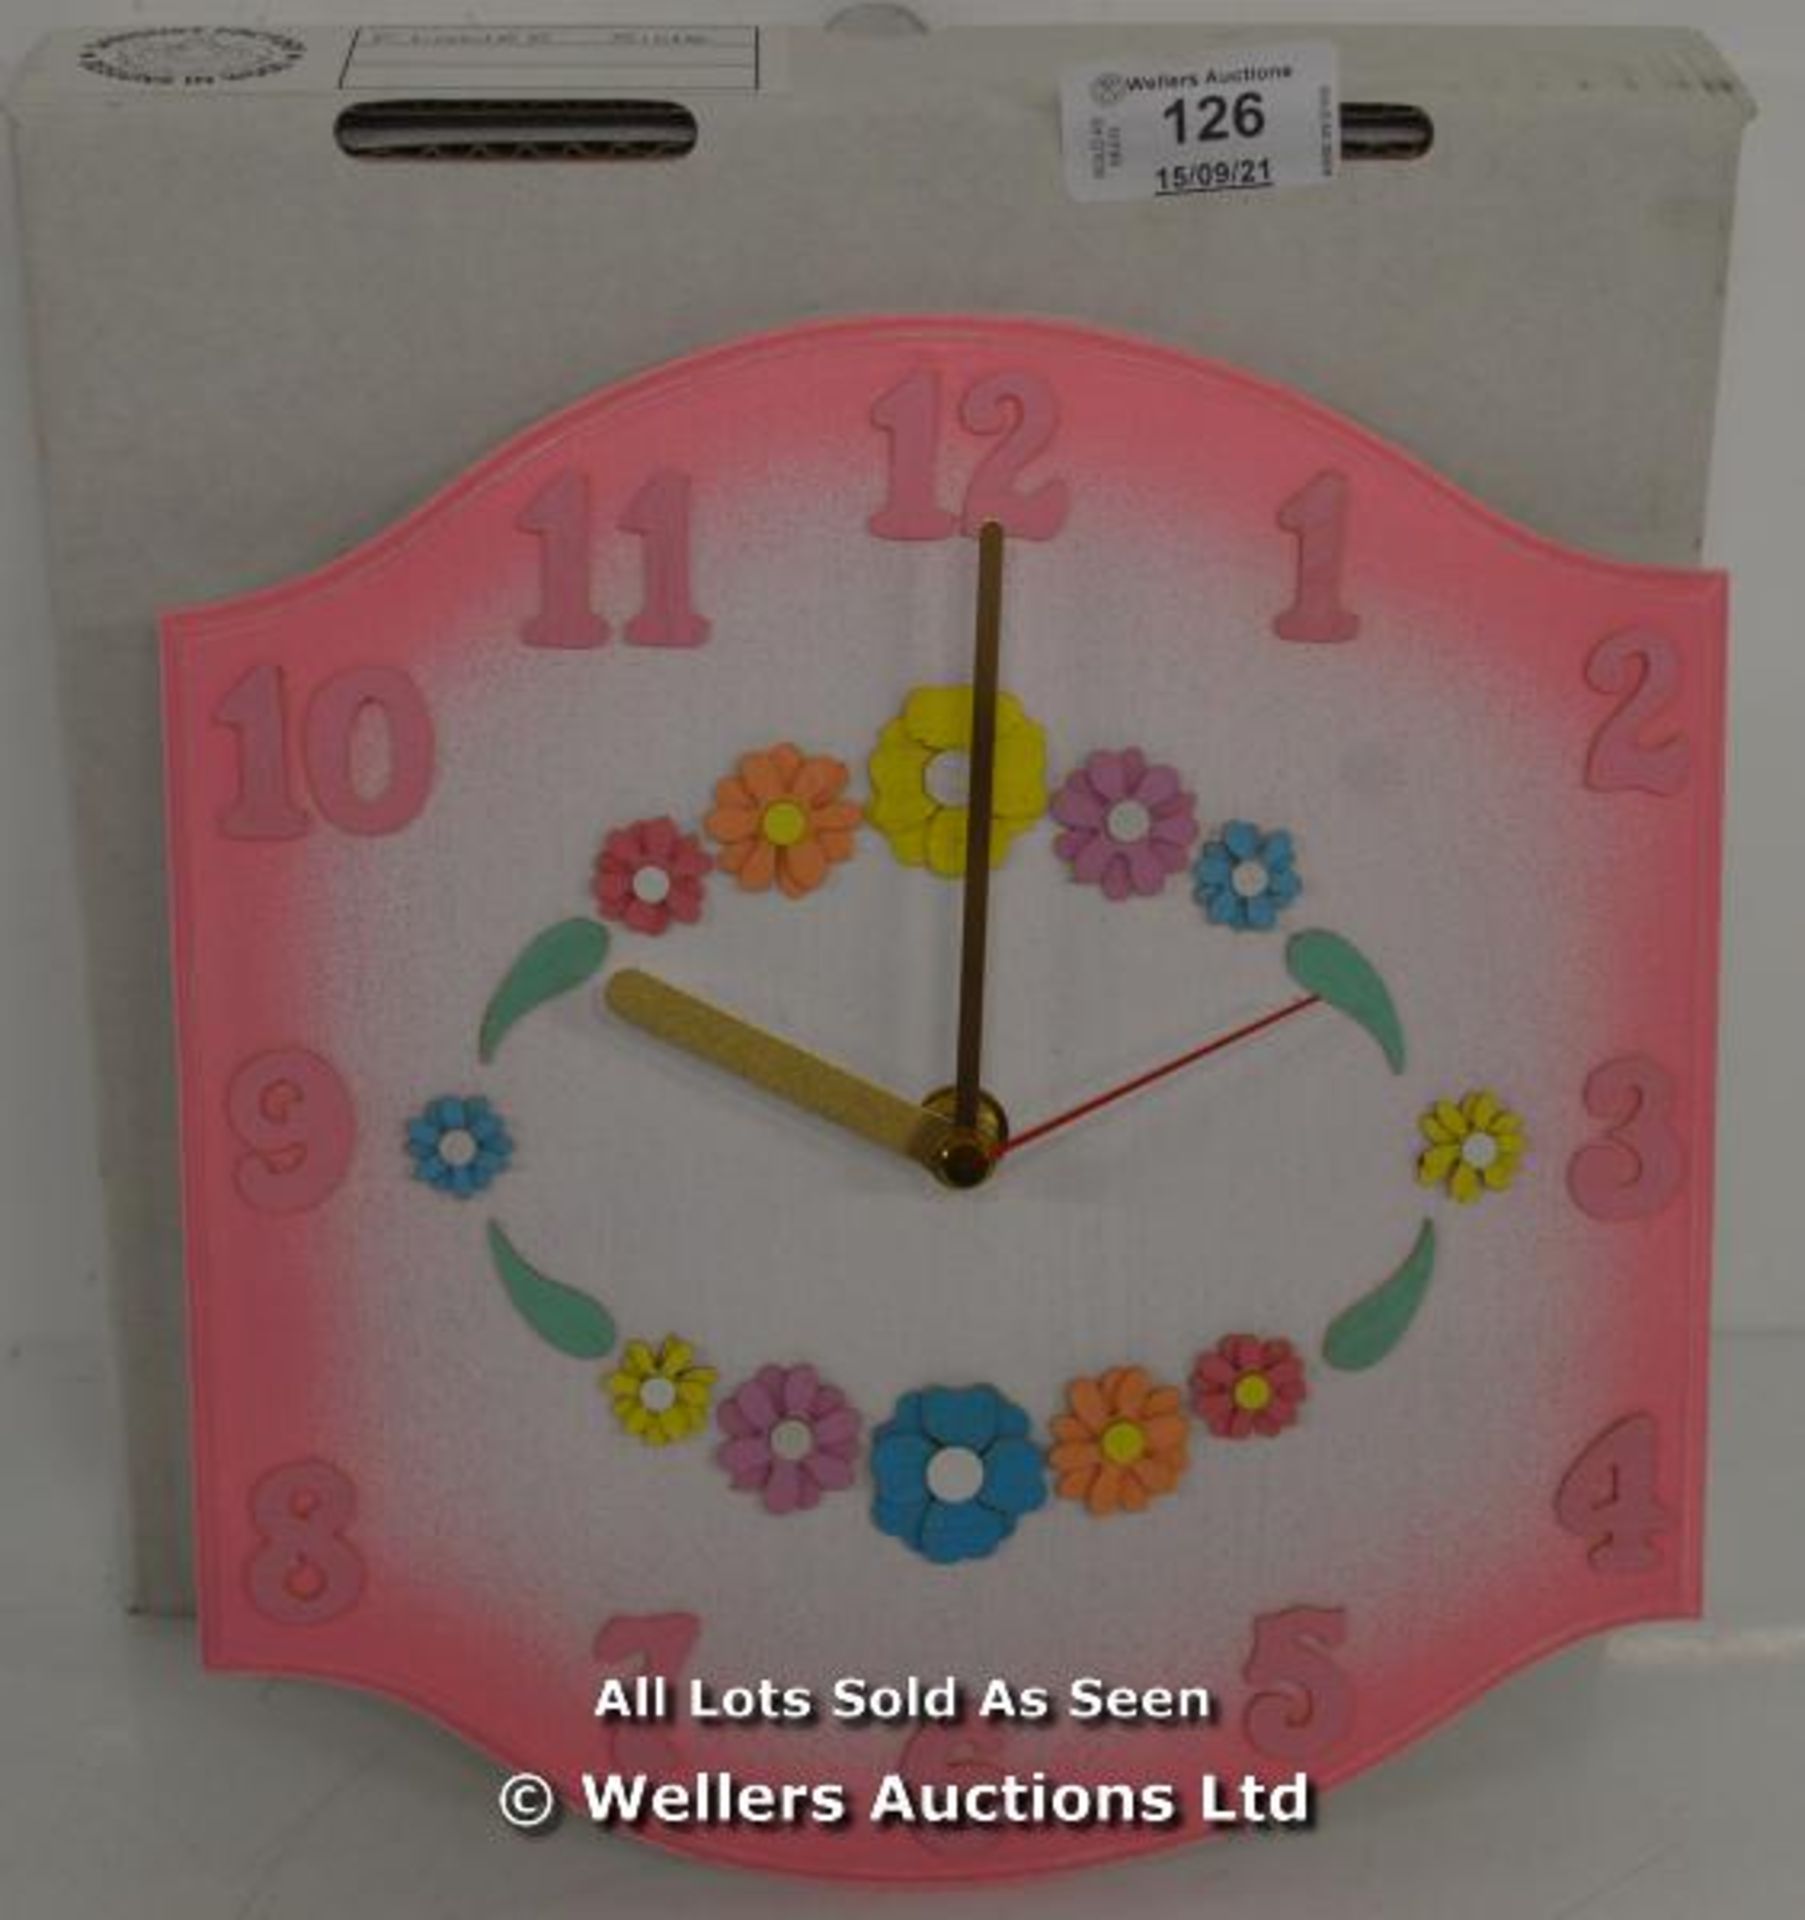 SAWDUST FACTORY, CHILDS CLOCK,QUARTZ, FLOWER RING / APPEARS TO BE NEW - OPENED BOX